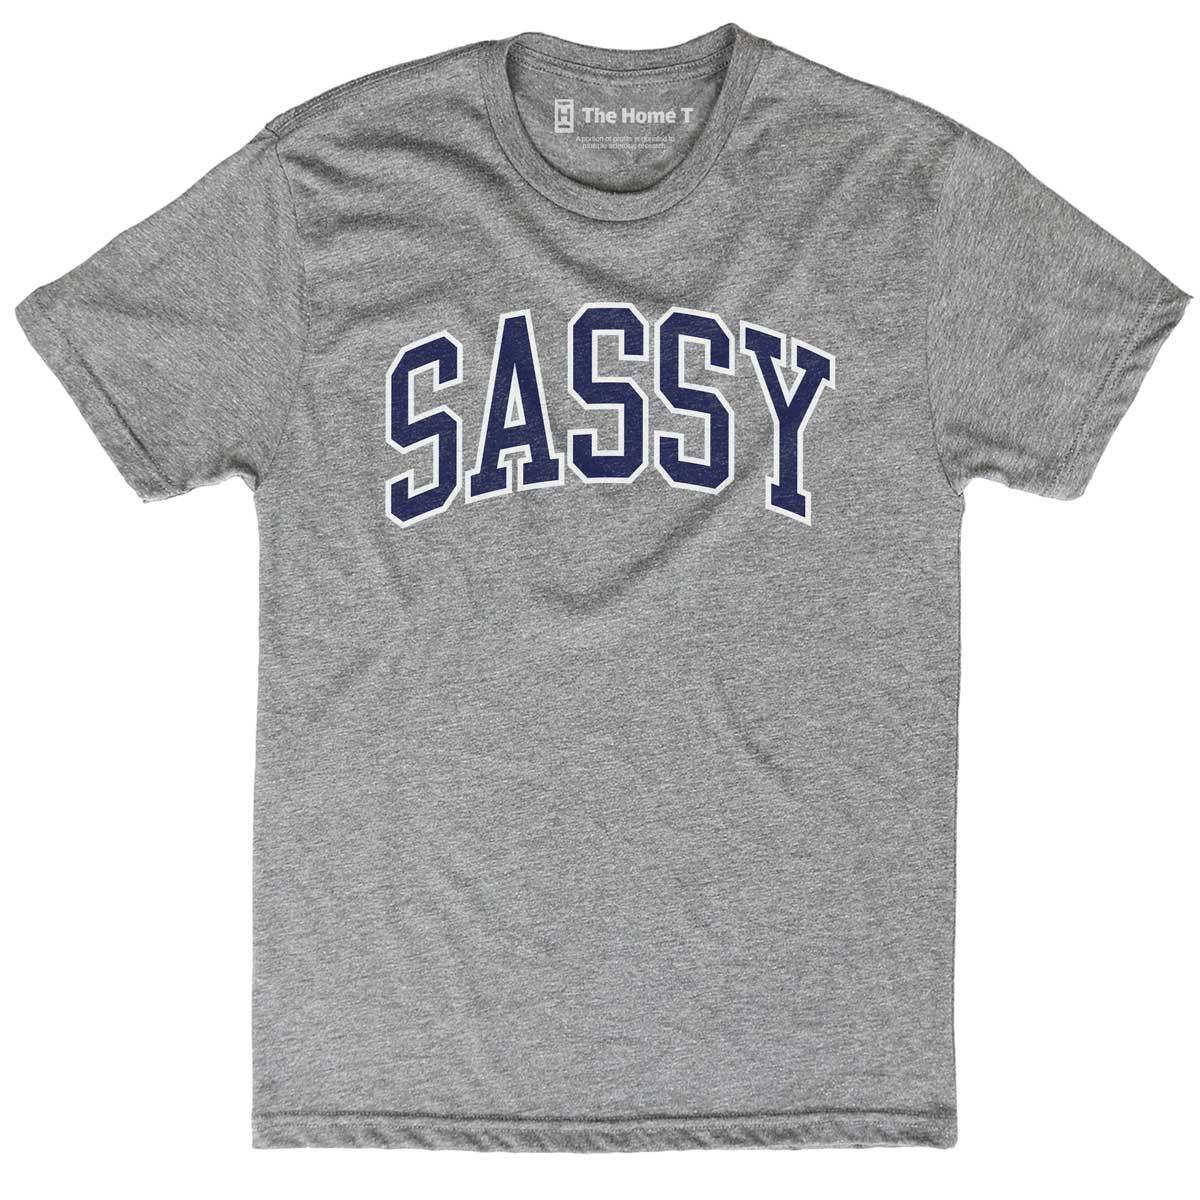 Sassy Crew neck The Home T XS Grey T-Shirt